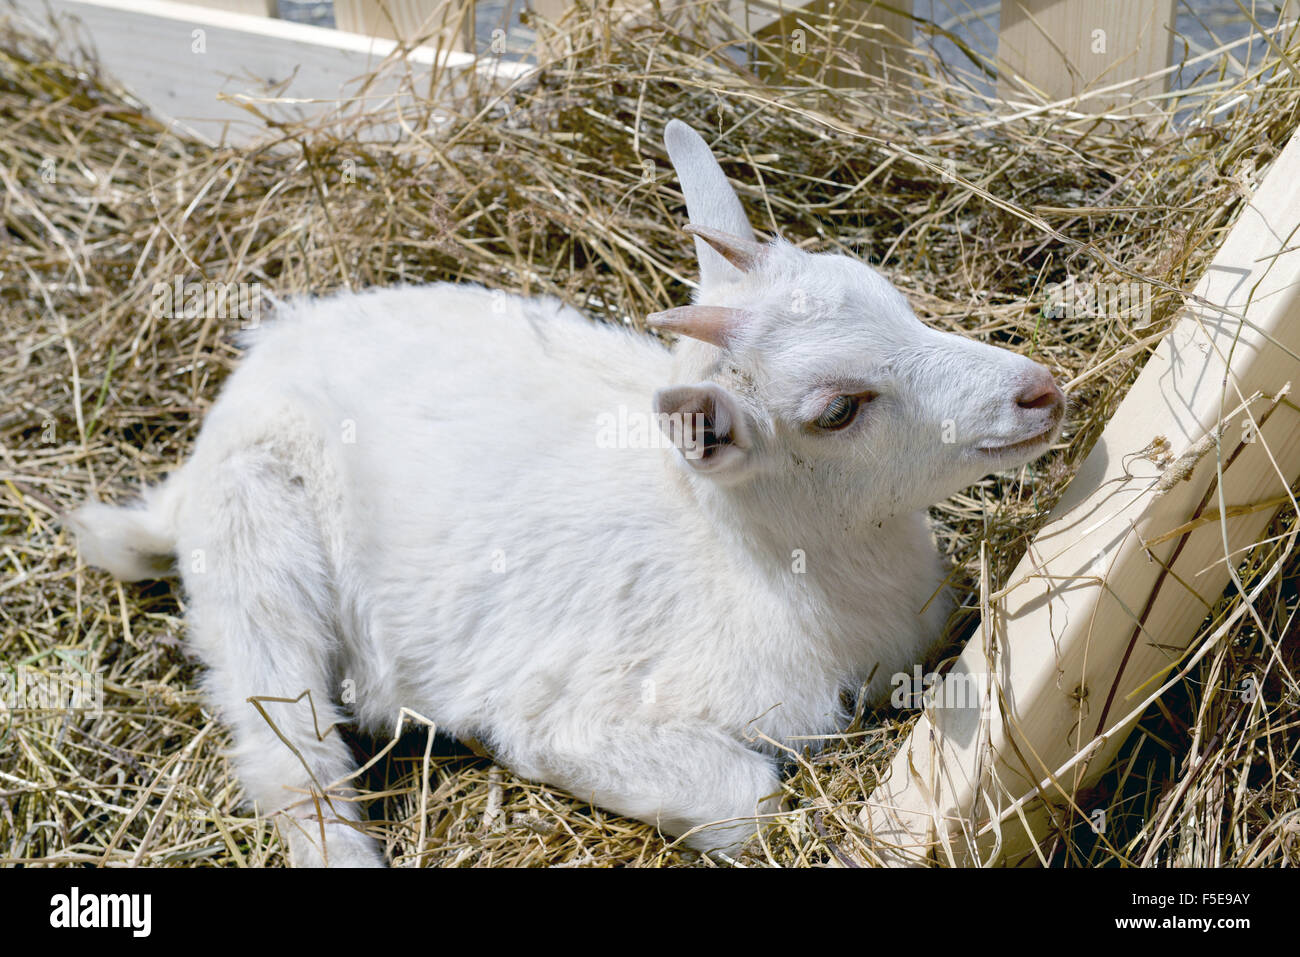 young goat eating hay in a corral Stock Photo